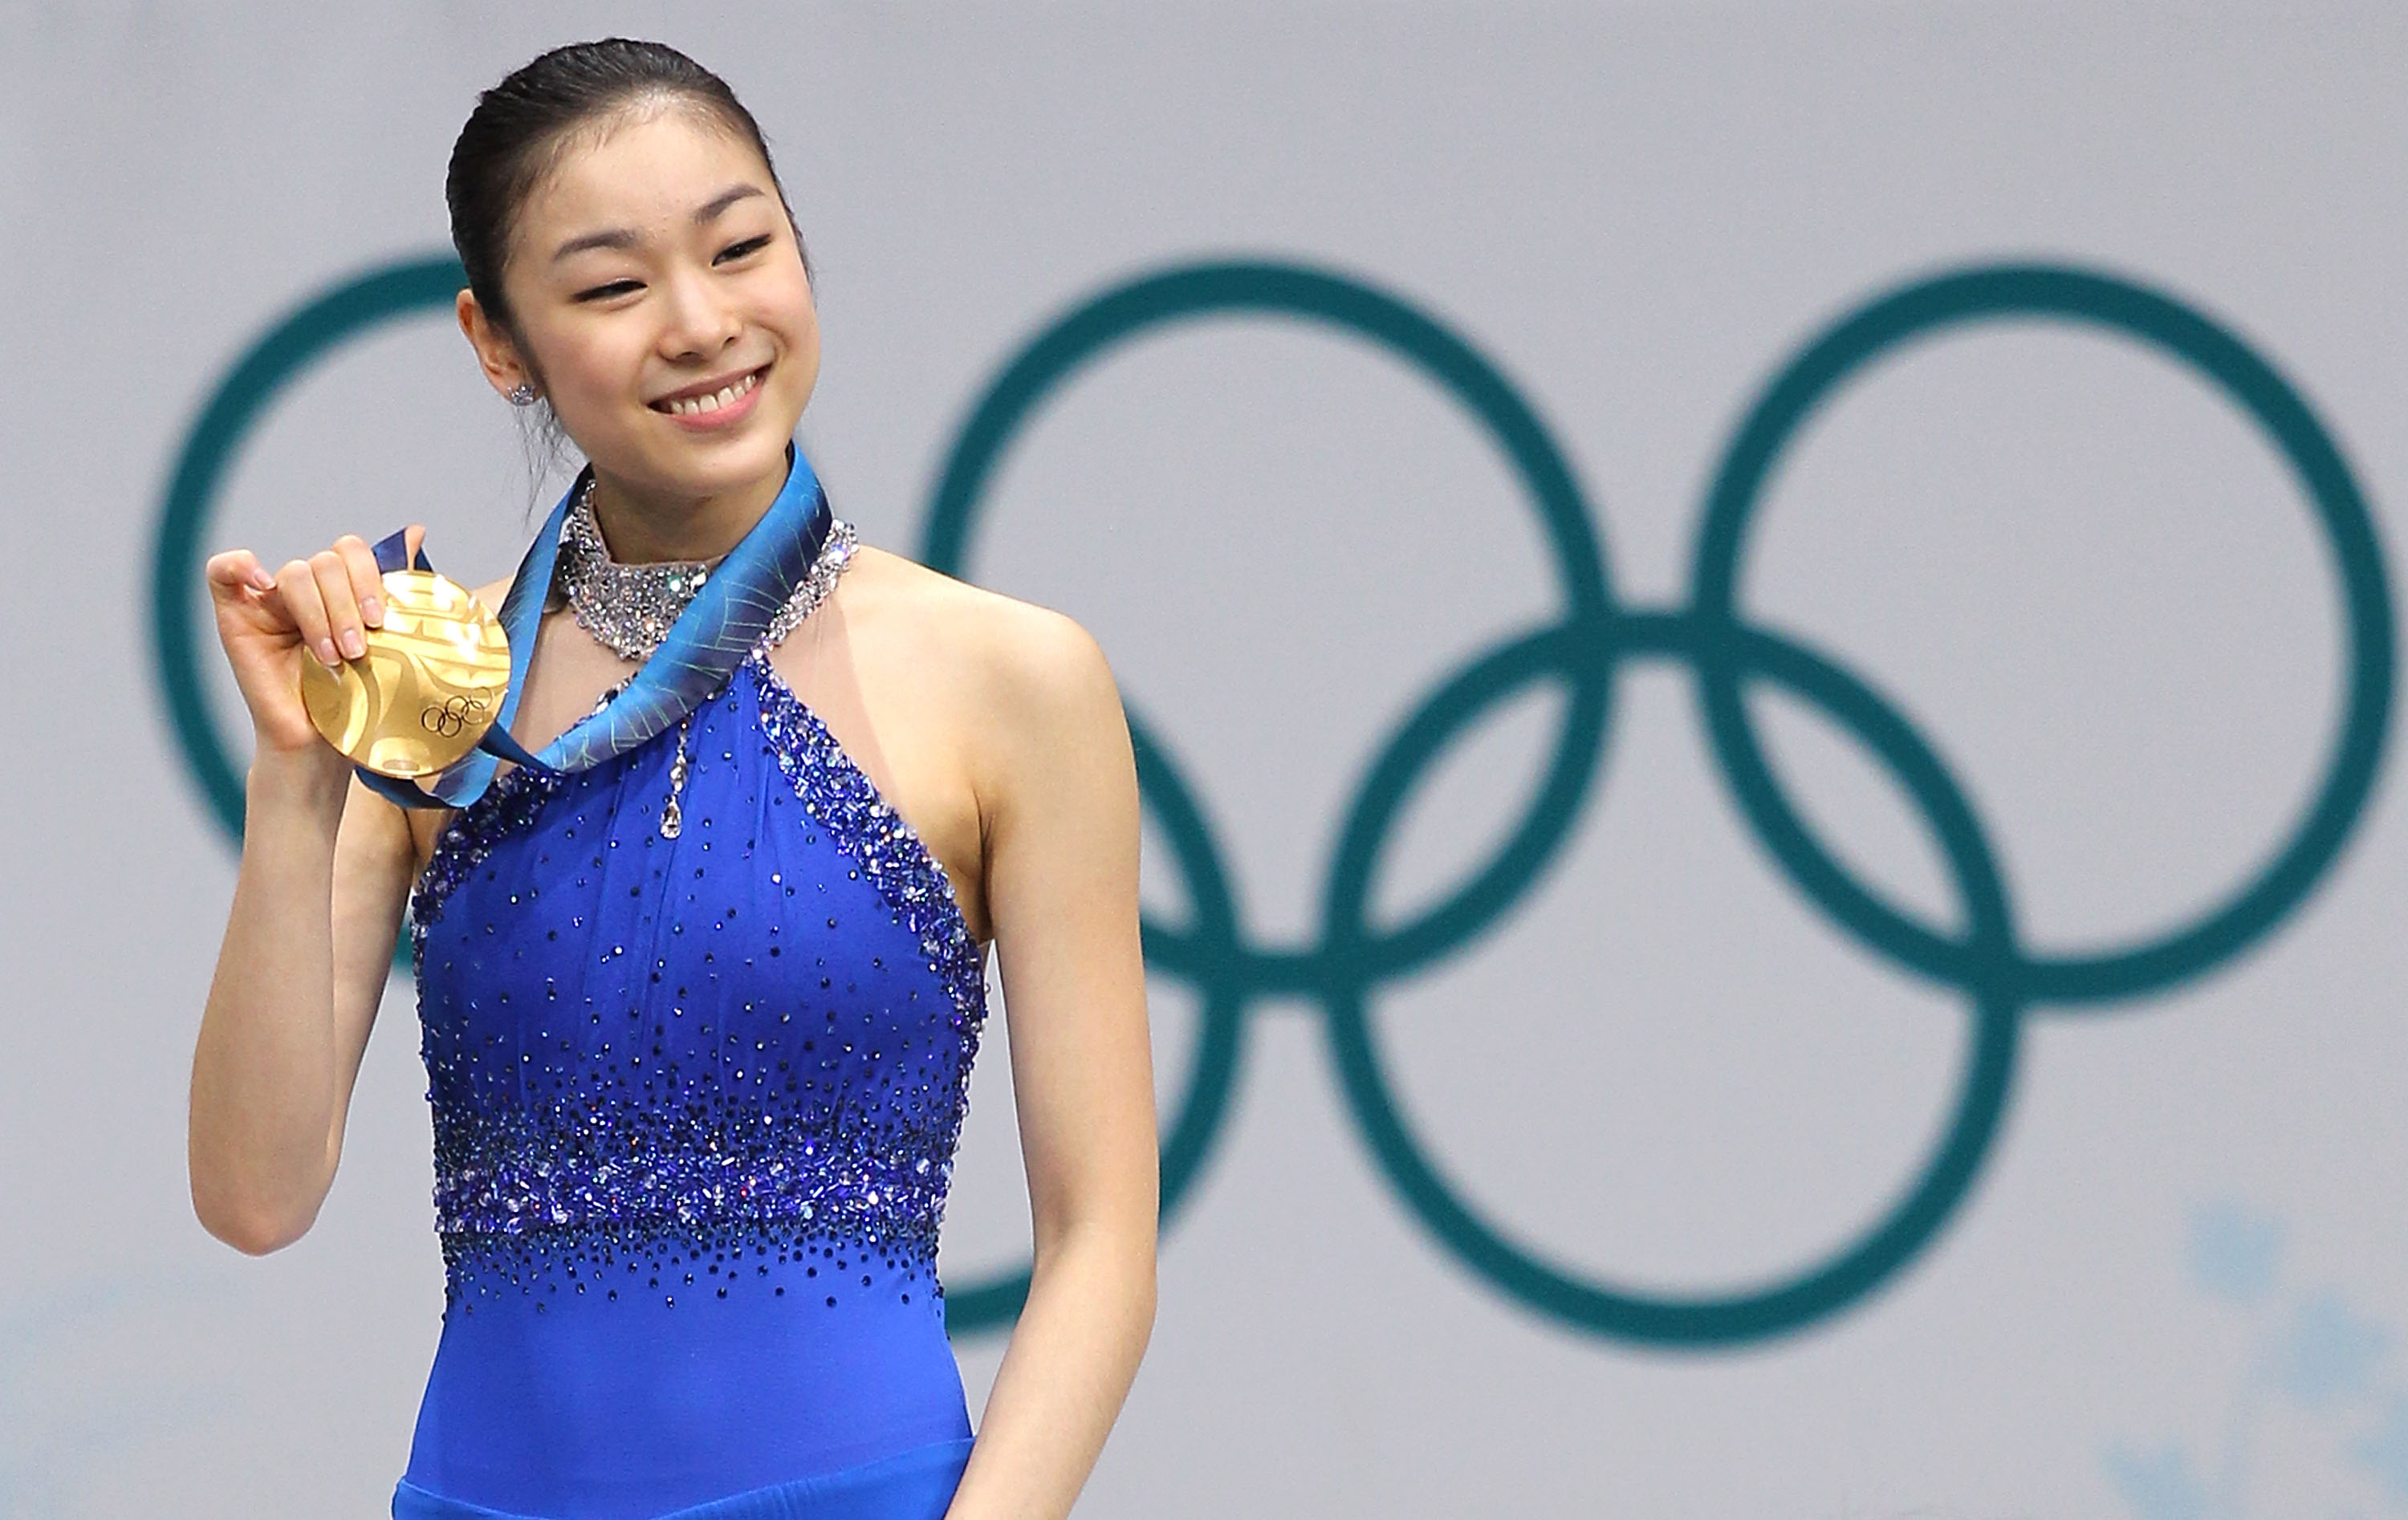 South Korea's Kim Yuna celebrates winning the gold medal in women's singles figure skating during the medal ceremony at the 2010 Vancouver Winter Olympics.